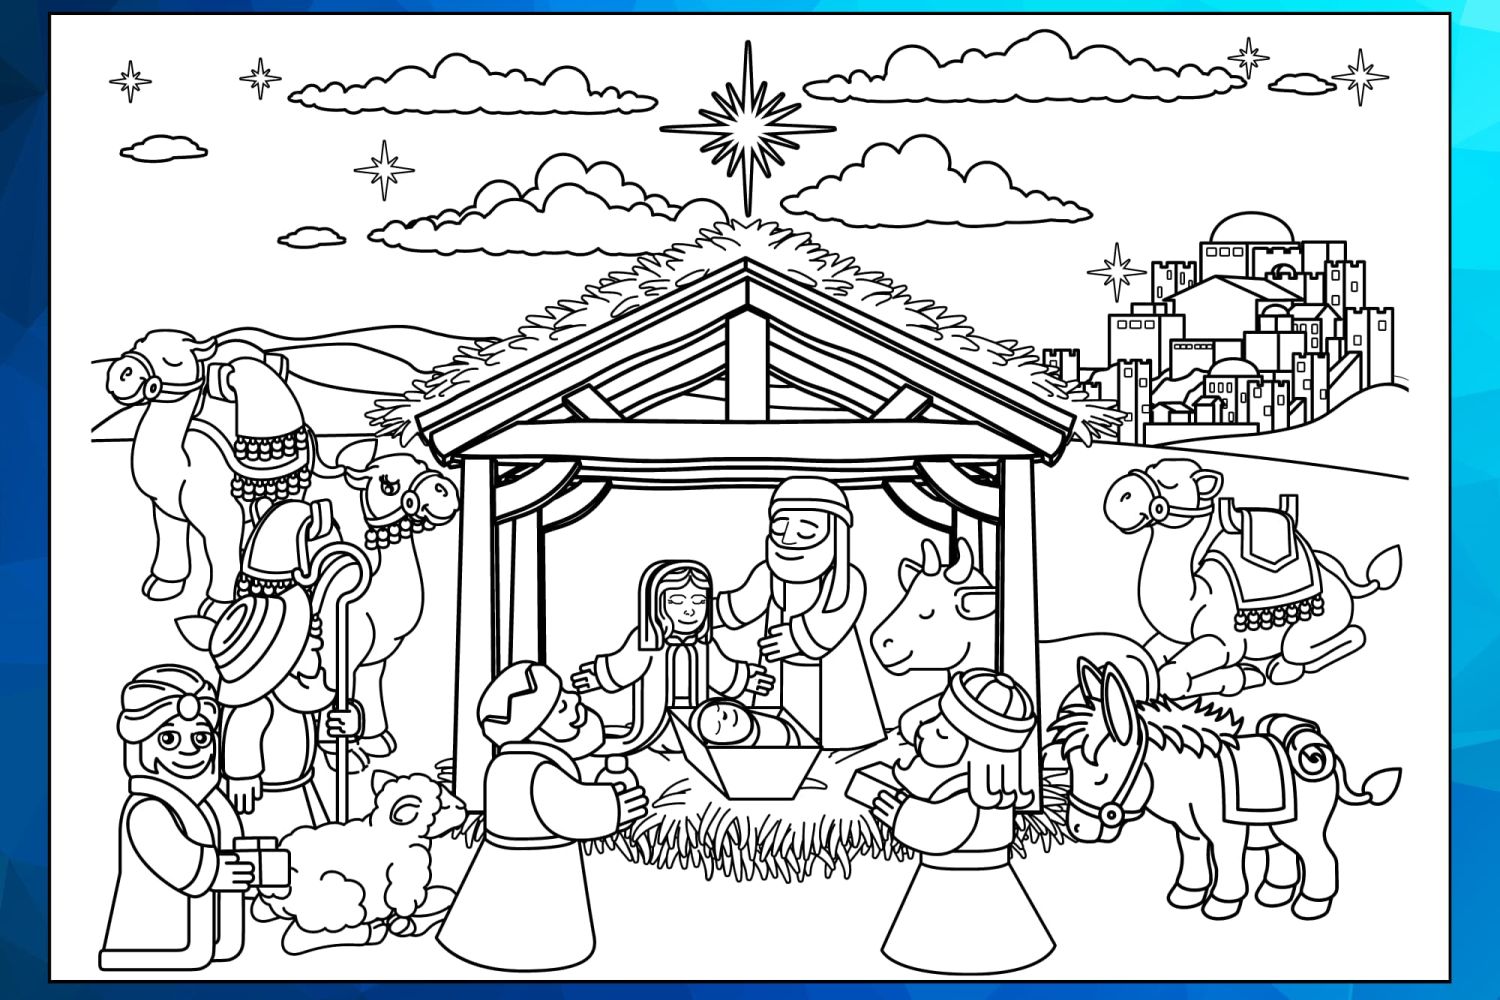 Nativity%20Scene%20Christmas%20Coloring%20Pages%20Worksheet%201-175b3fa4 Family 